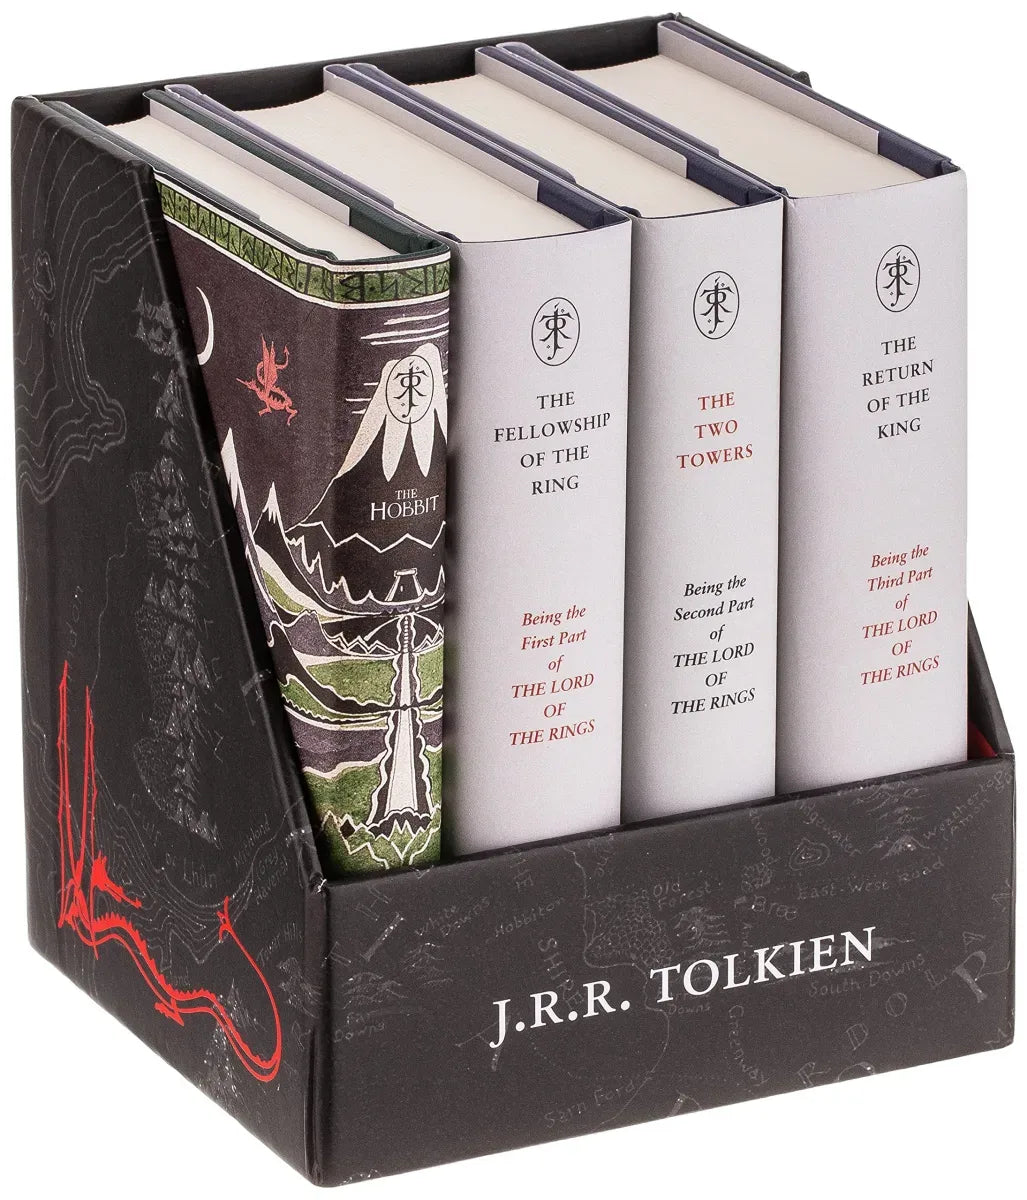 The Hobbit & The Lord of the Rings Gift Set A Middle-earth Treasury